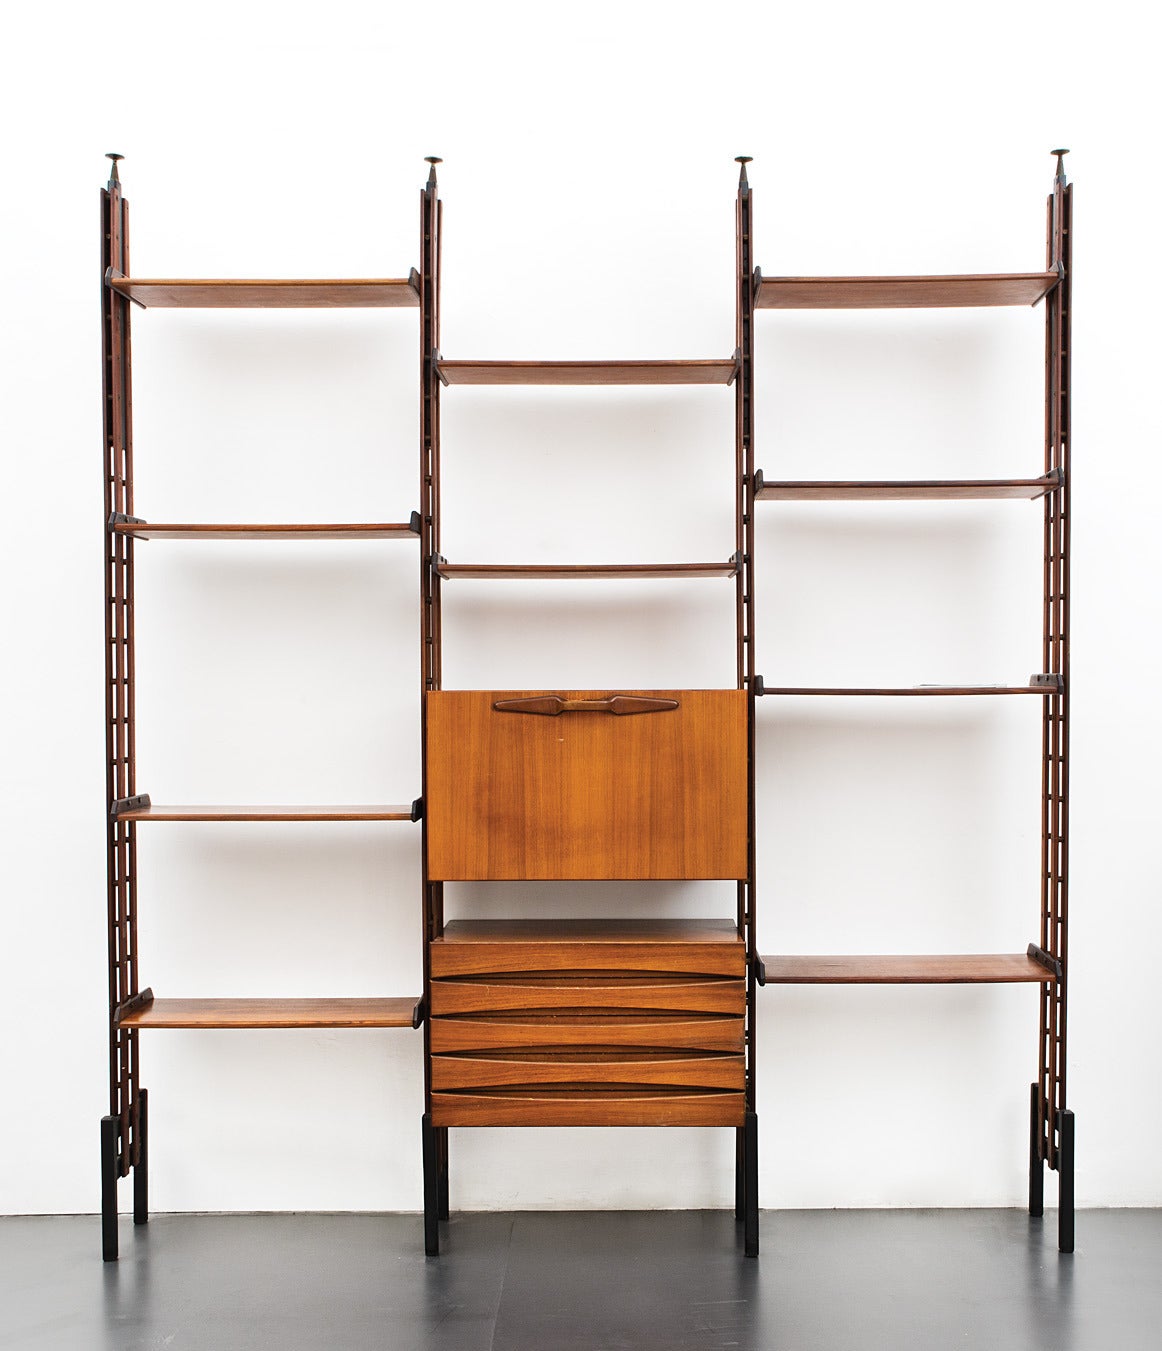 An Italian 1950s rosewood bookshelf system. Massif rosewood and brass fittings. Adjustable height from 275 cm to 320 cm, the bookcase includes two storage units: one bar cabinet and one drawer. Both are shown in image 3. Excellent condition.